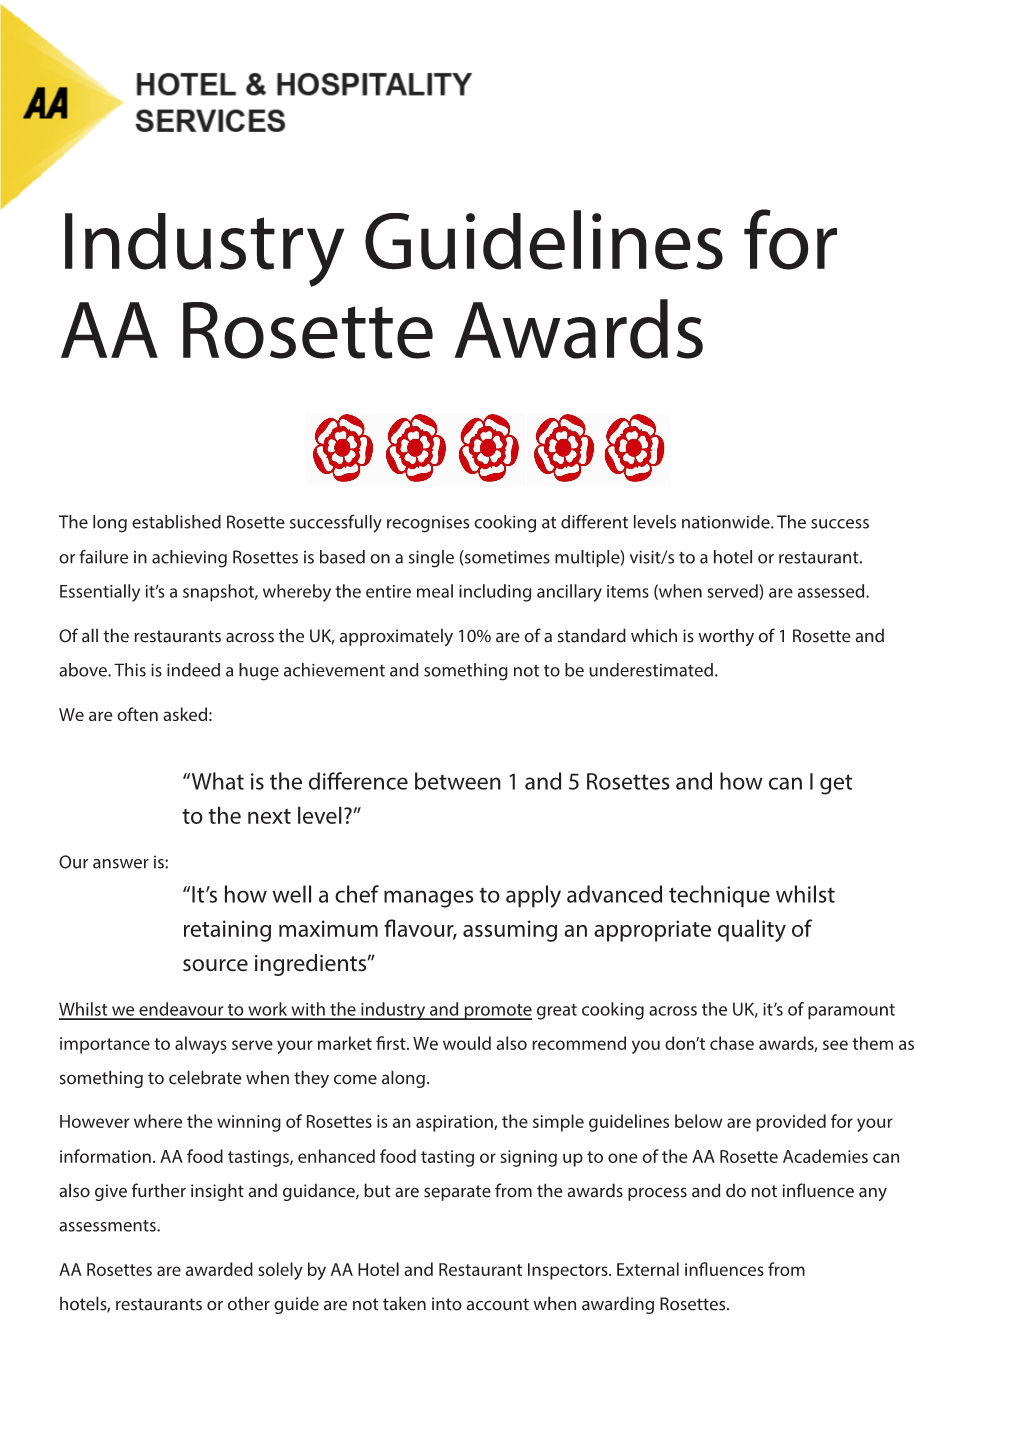 Download Industry Guidelines for AA Rosette Awards